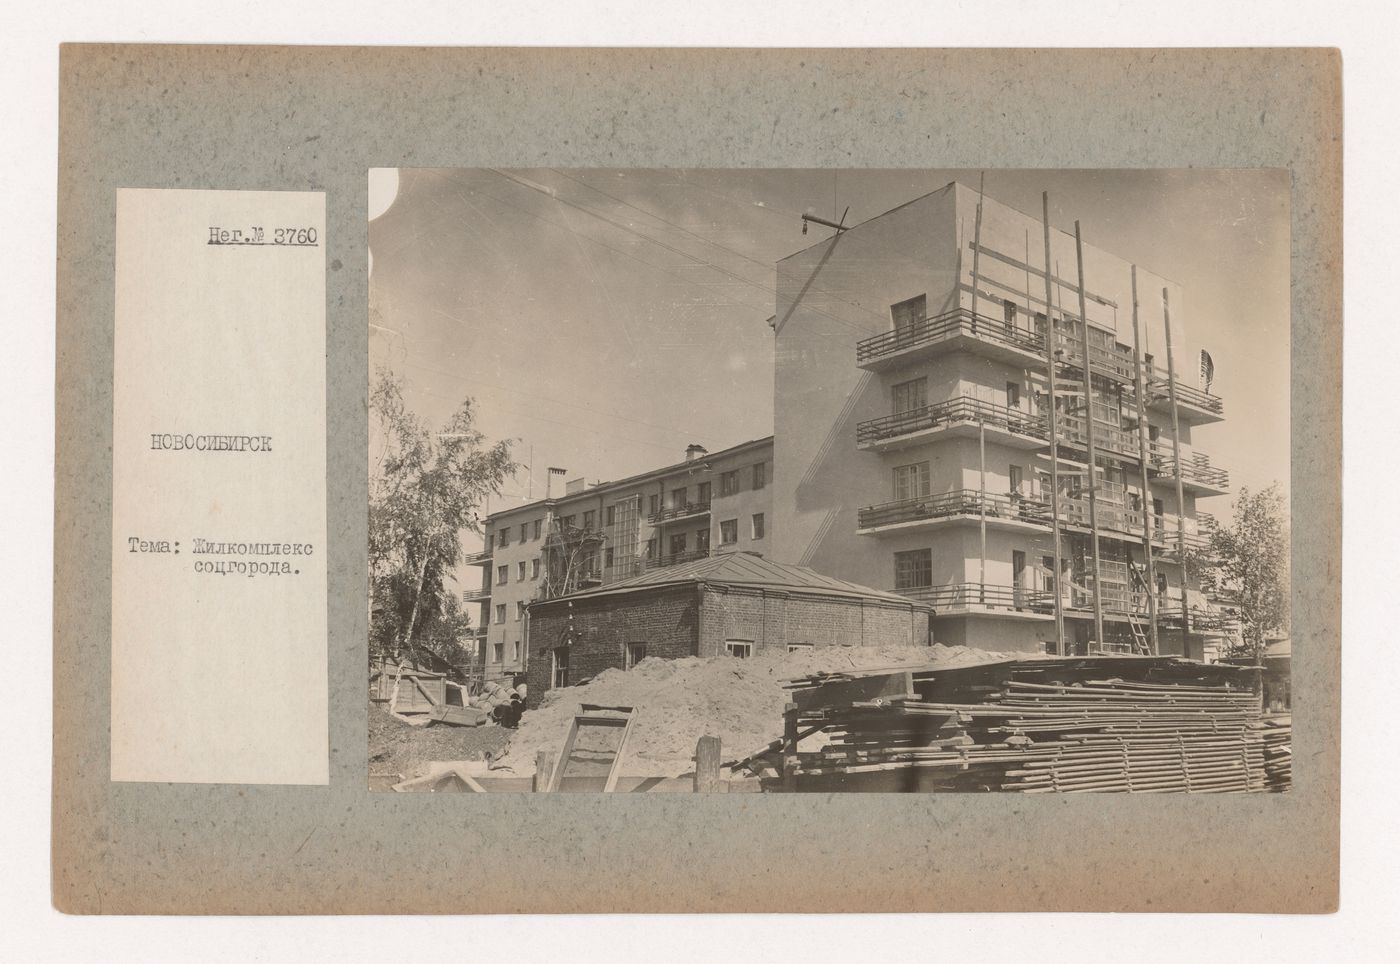 View of housing under construction, Novosibirsk, Soviet Union (now in Russia)